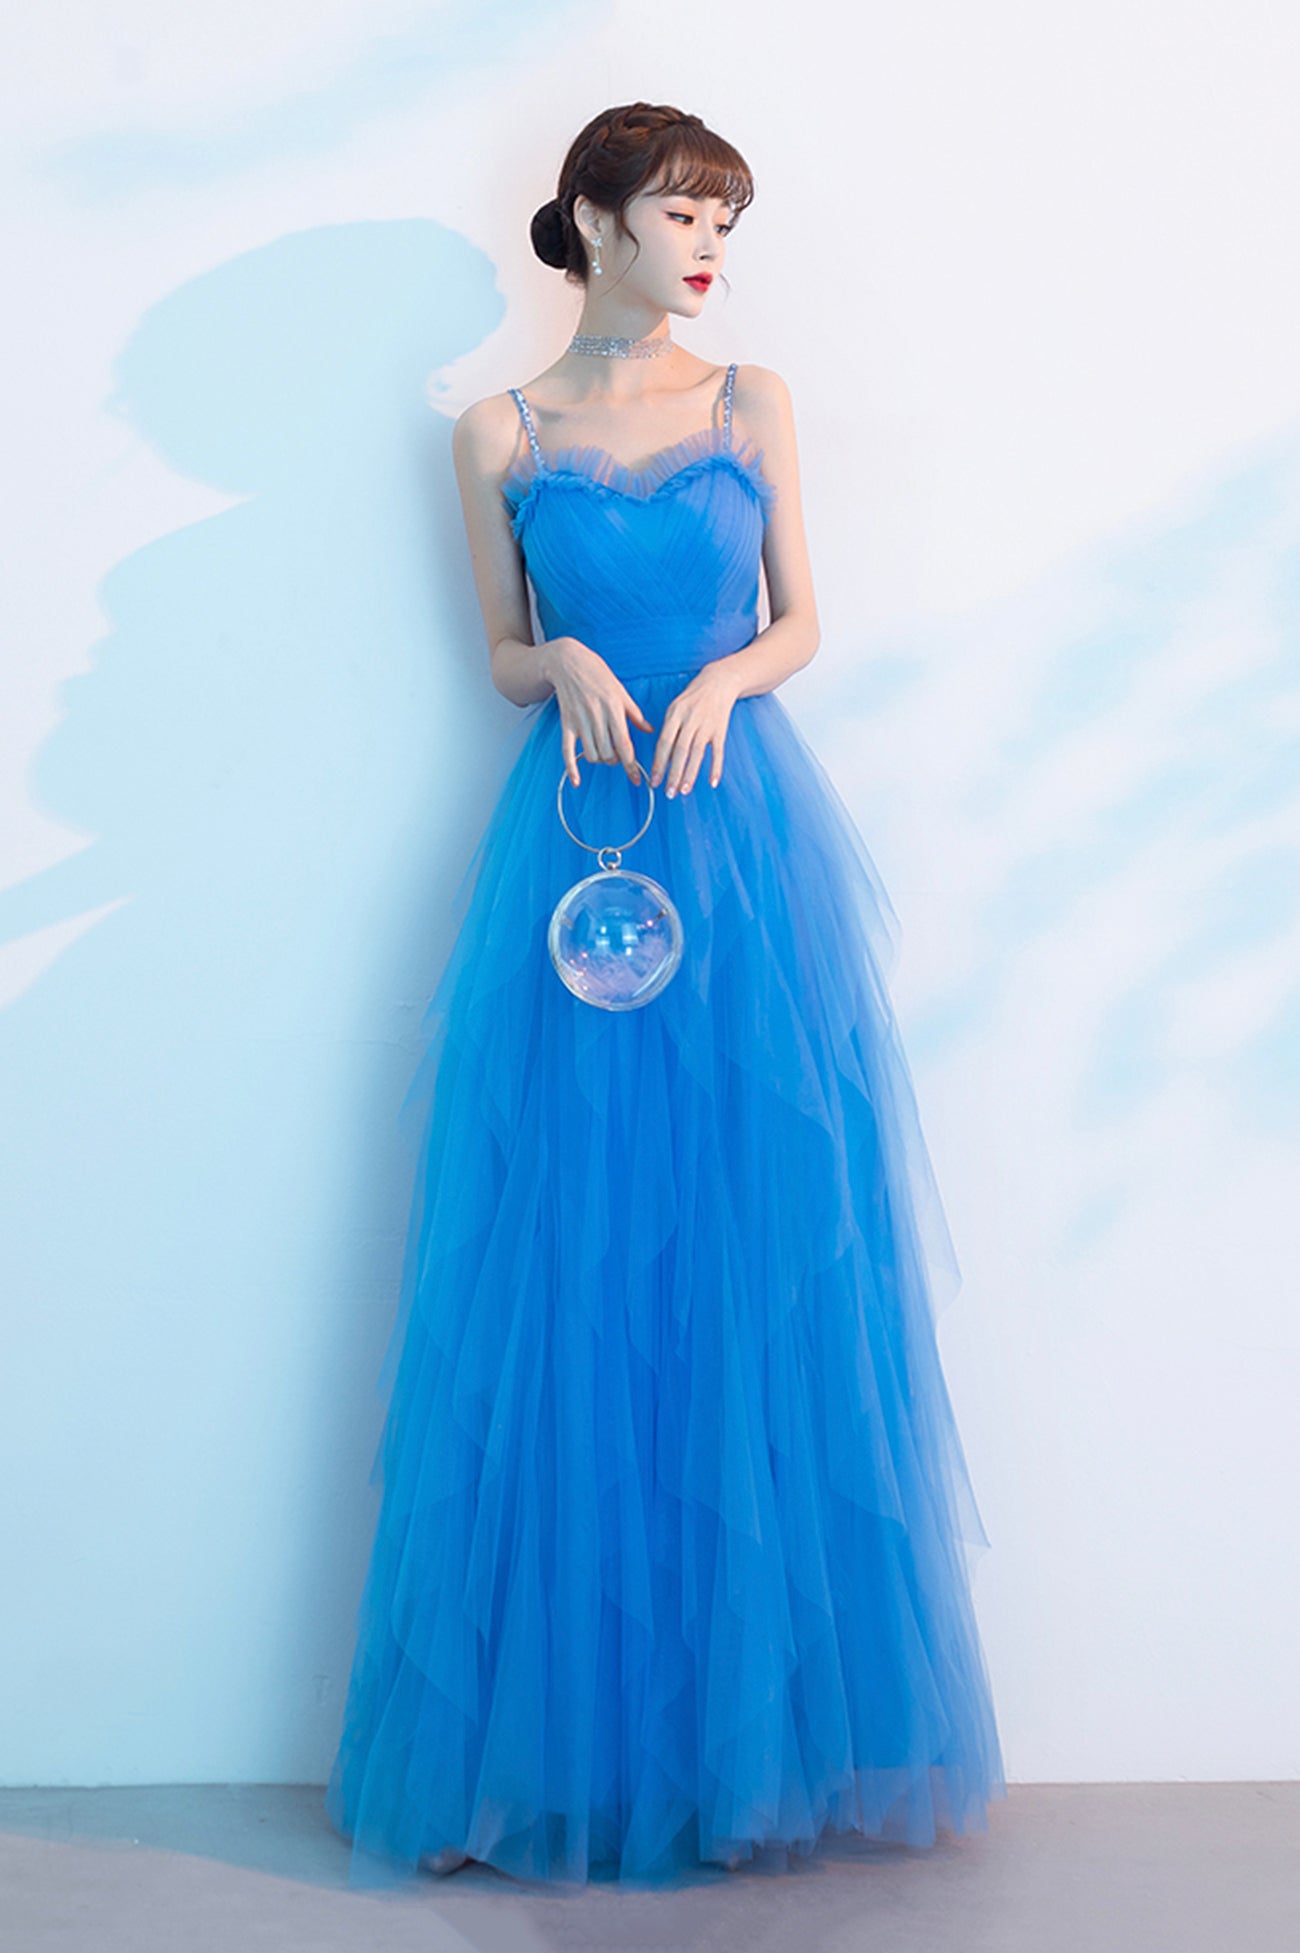 Blue Spaghetti Strap Tulle Long Prom Dress, Cute Blue Evening Party Dress